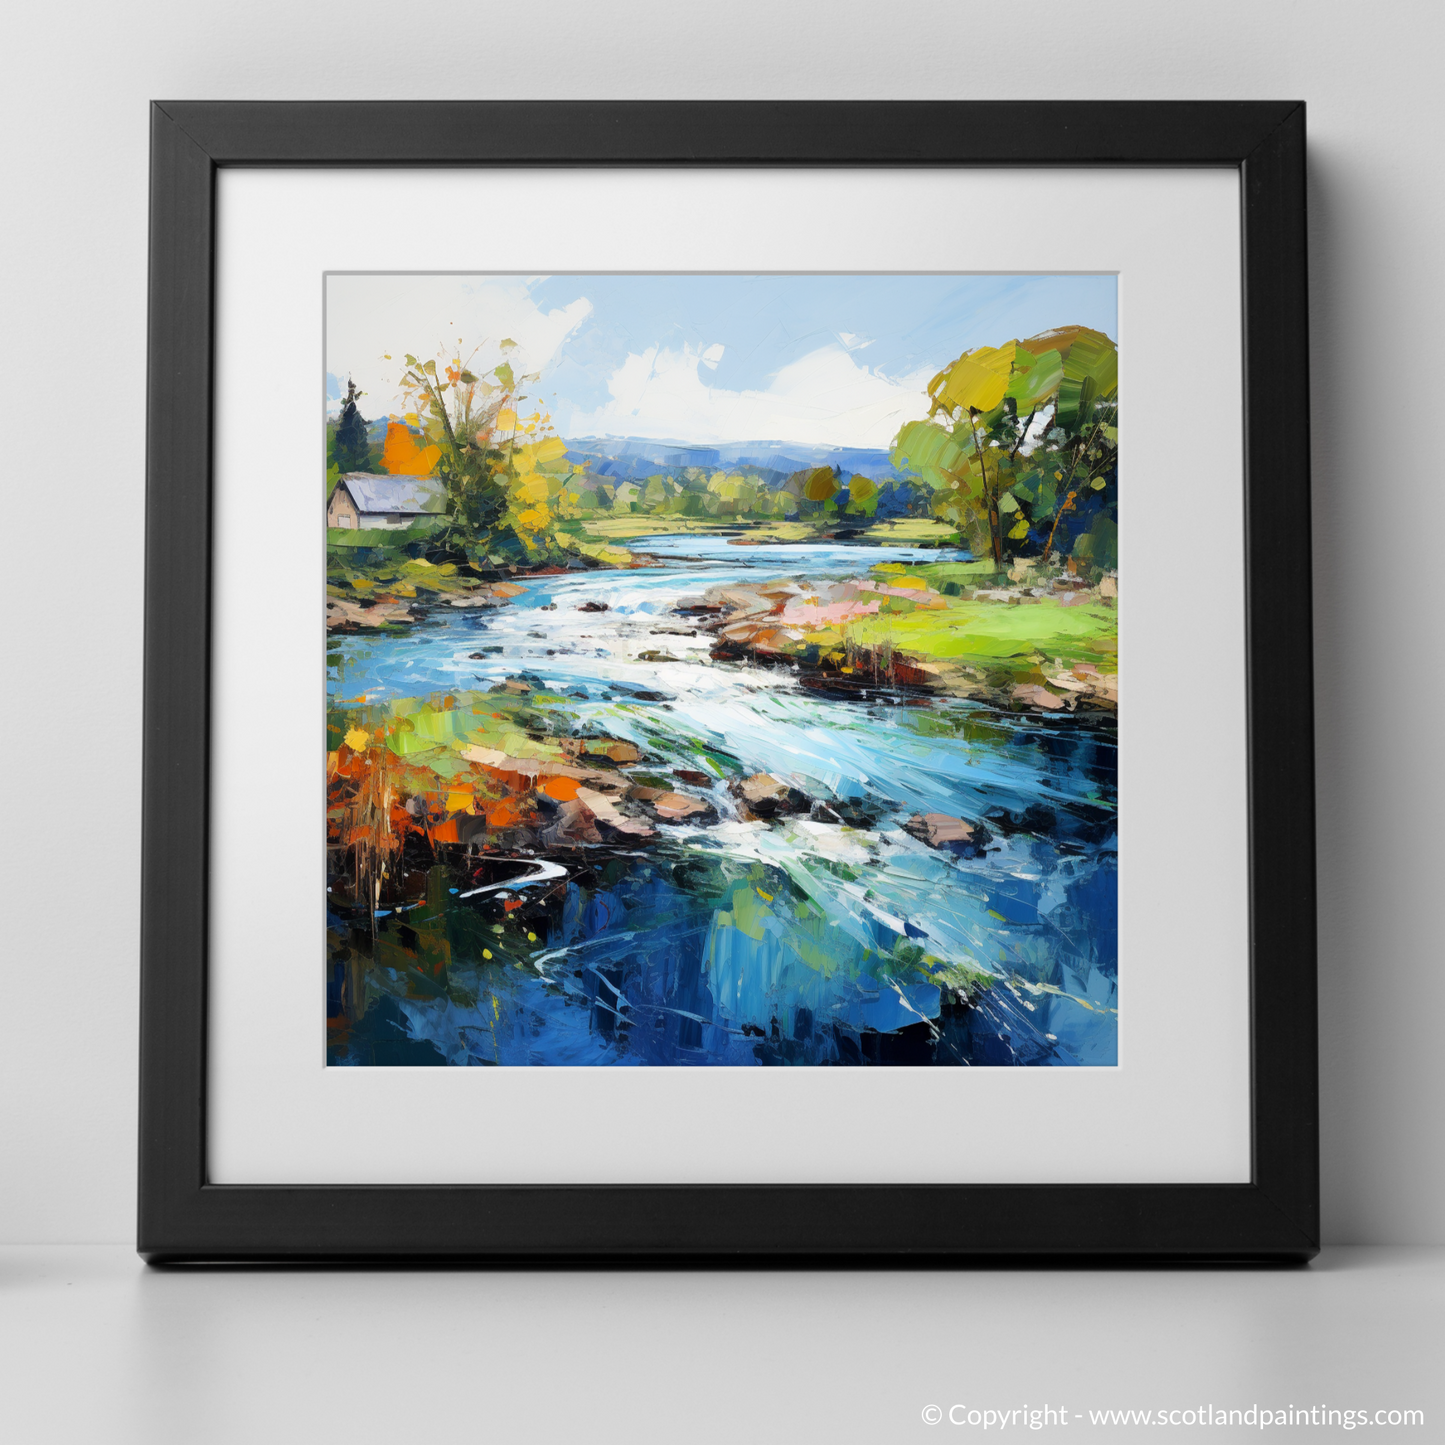 Art Print of River Leven, West Dunbartonshire with a black frame